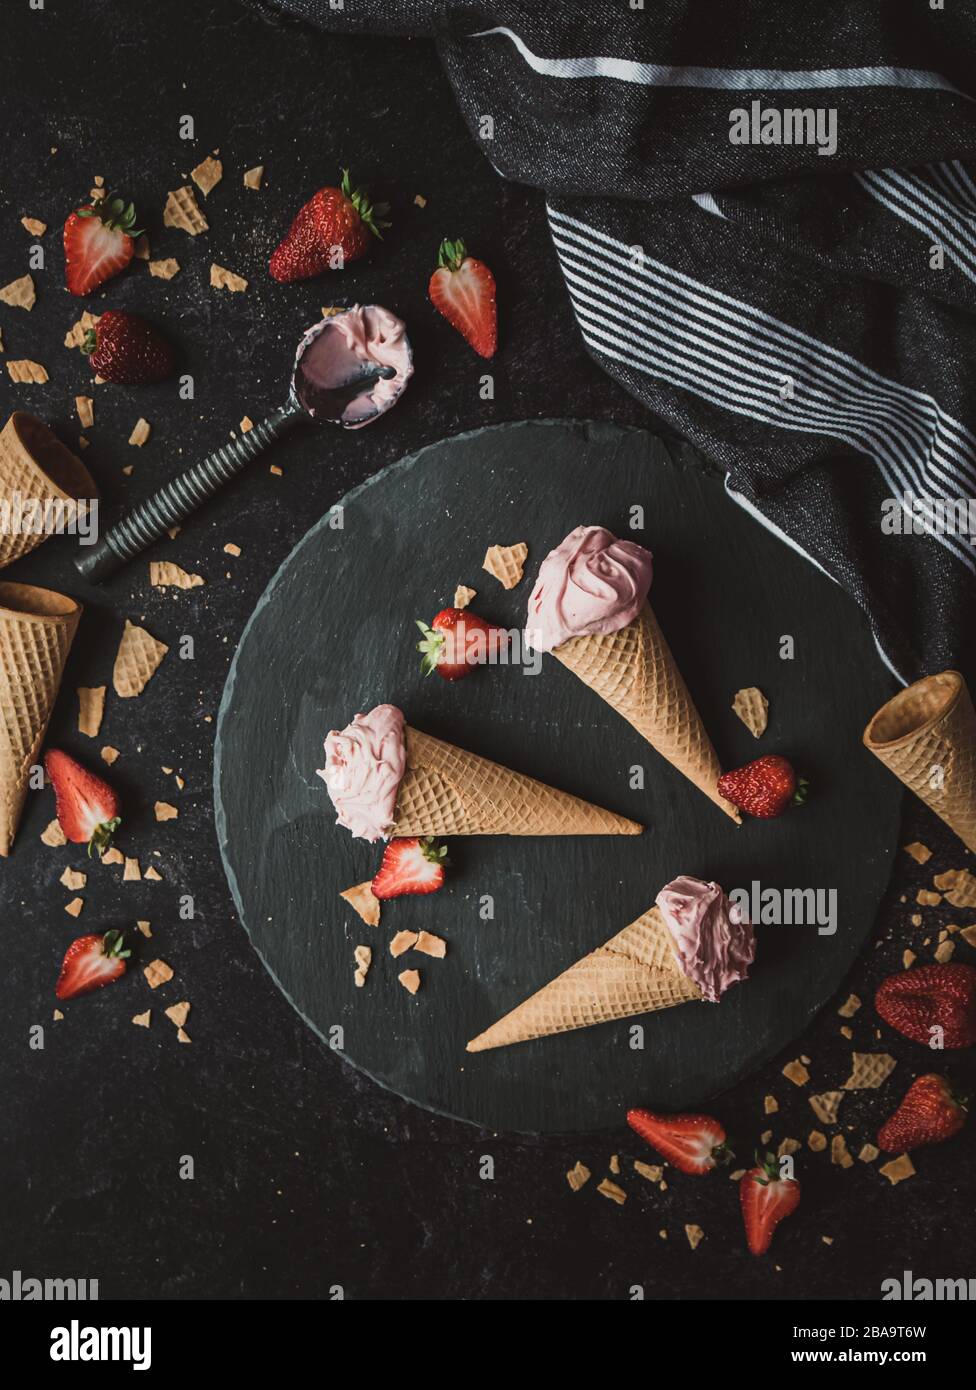 Top view of strawberry ice cream cones on a black background. Stock Photo